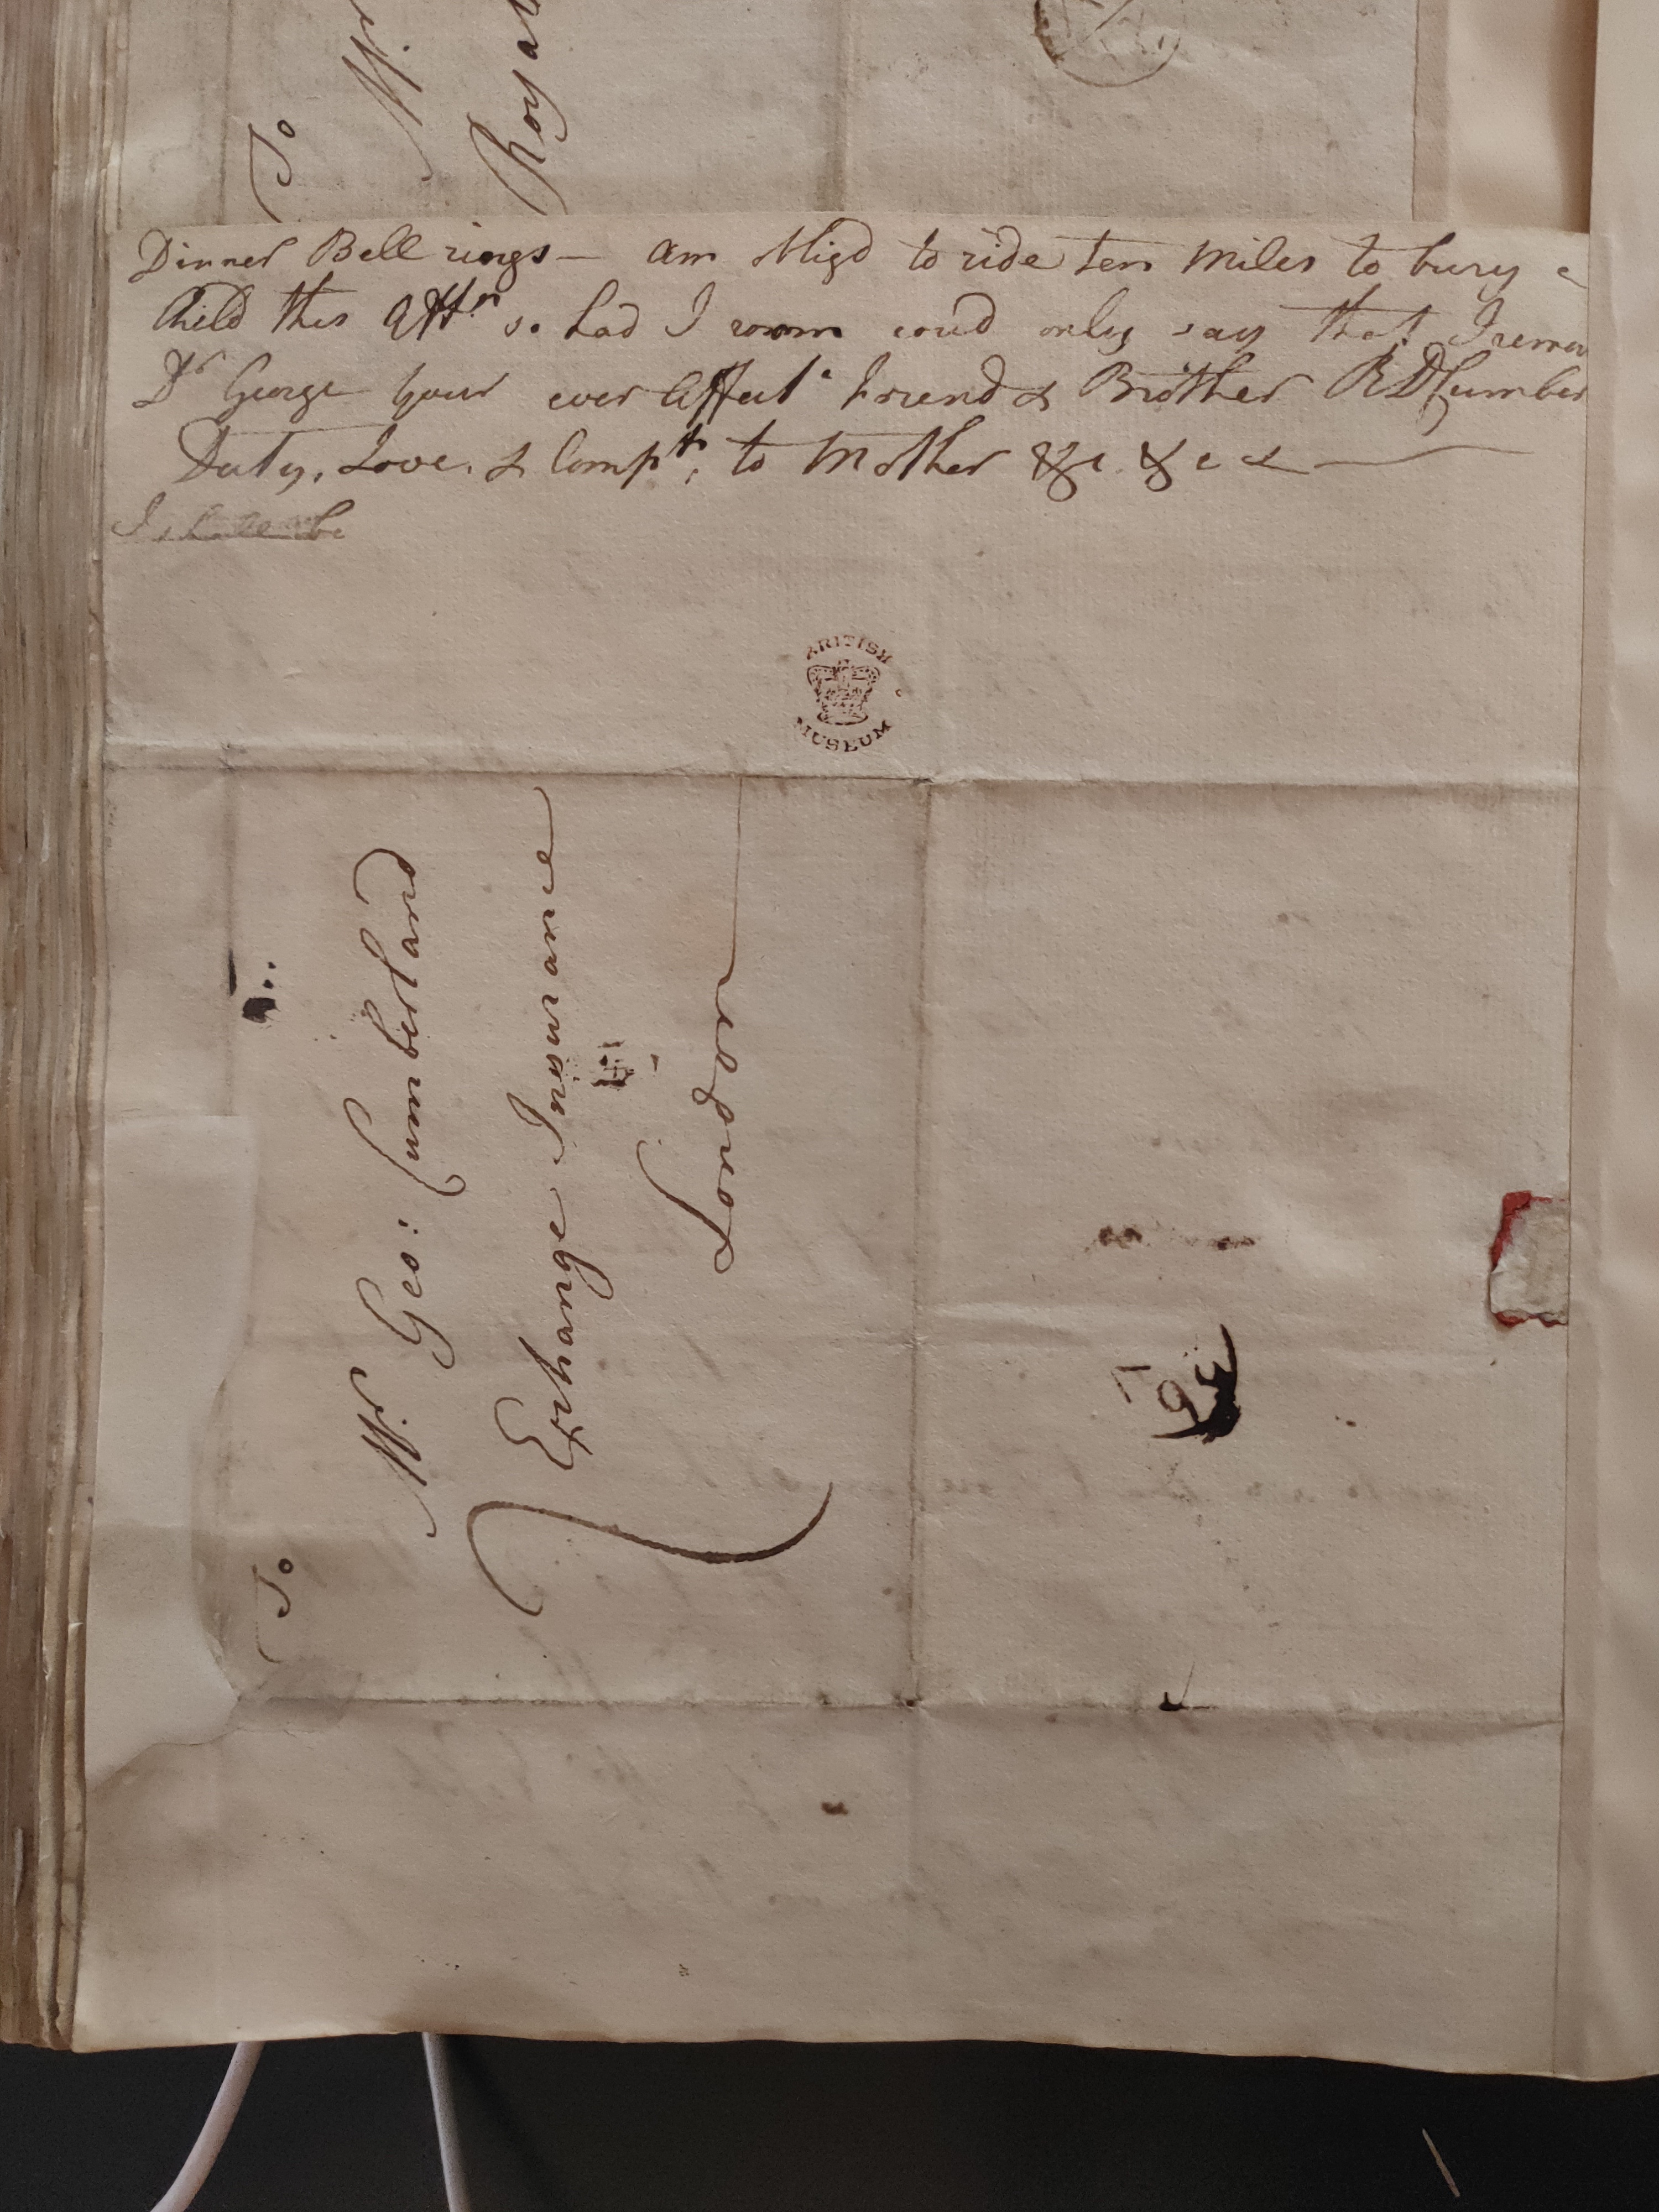 Image #4 of letter: Richard Cumberland to George Cumberland, 25 August 1775